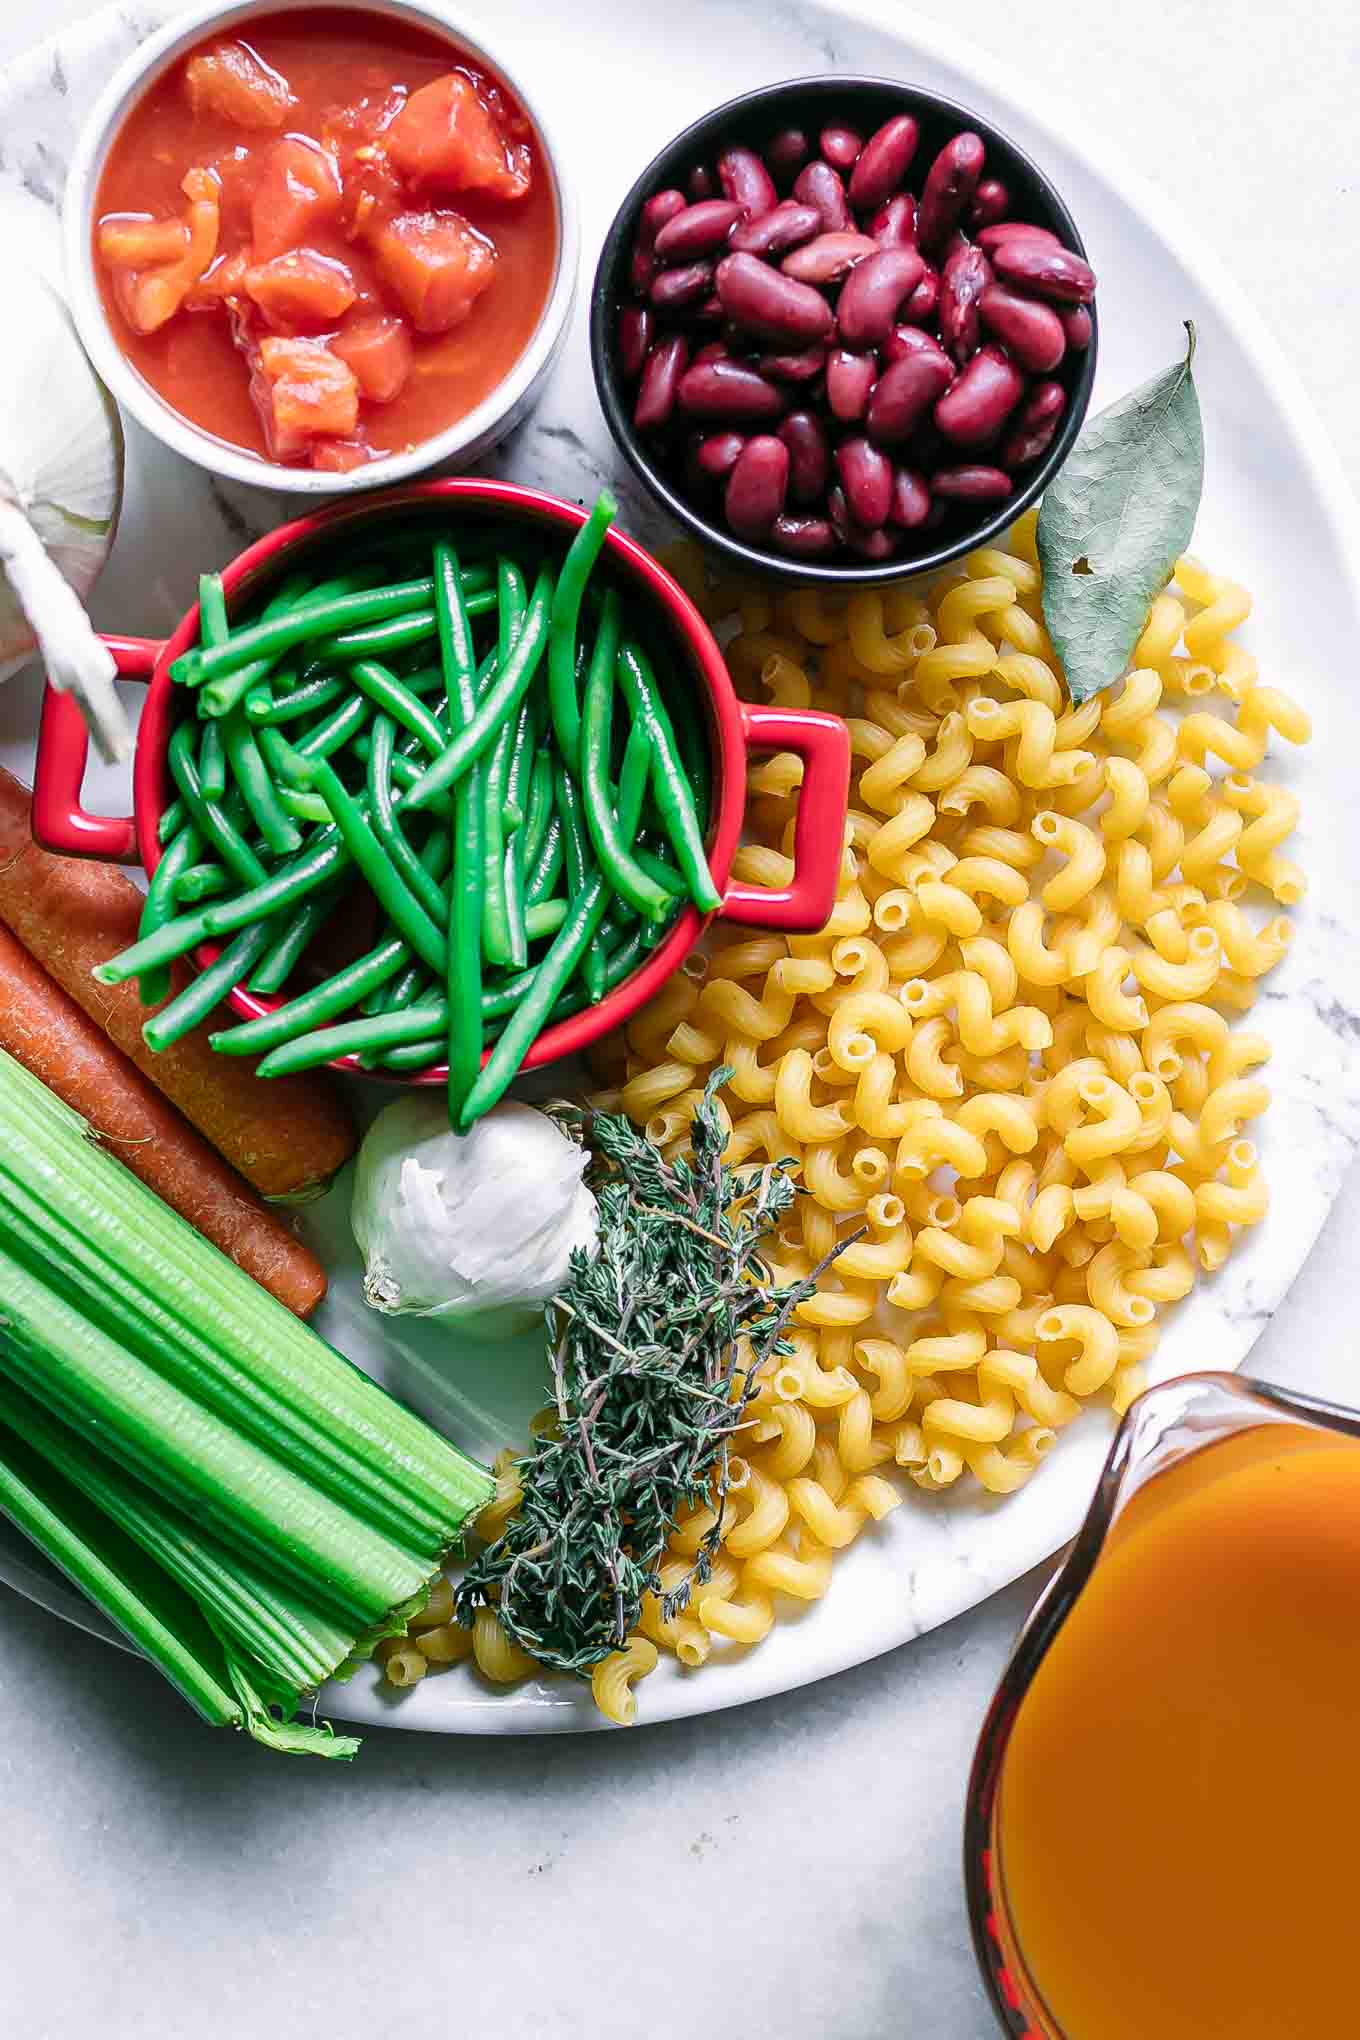 bowls of tomatoes, beans, green beans, pasta, garlic, spices, and vegetables on a table for minestrone soup